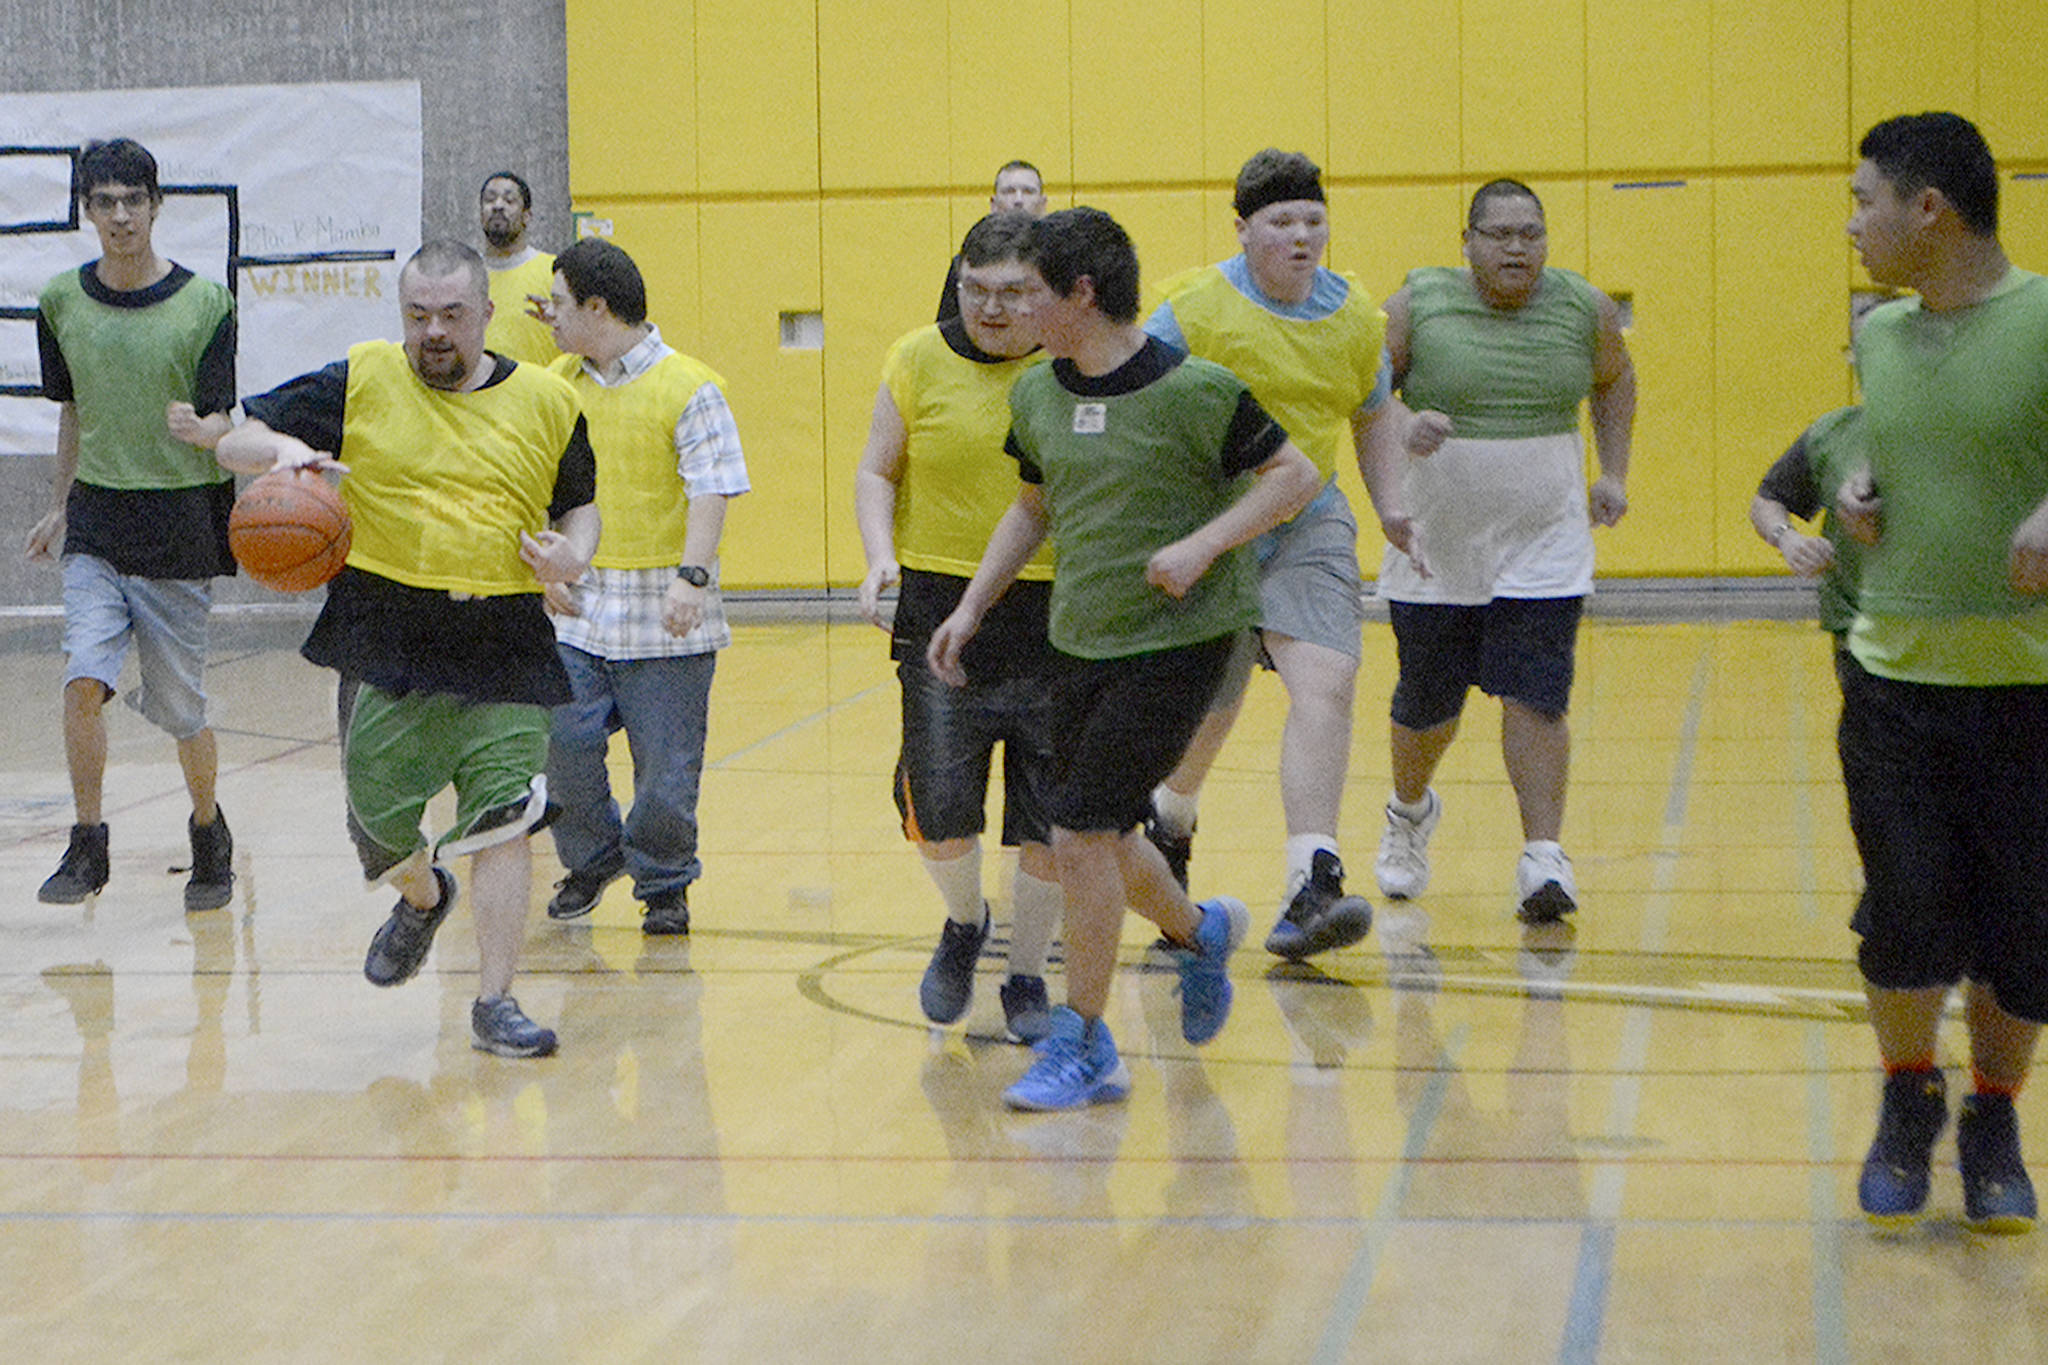 Hoops for Hope a fun fundraiser for special needs students